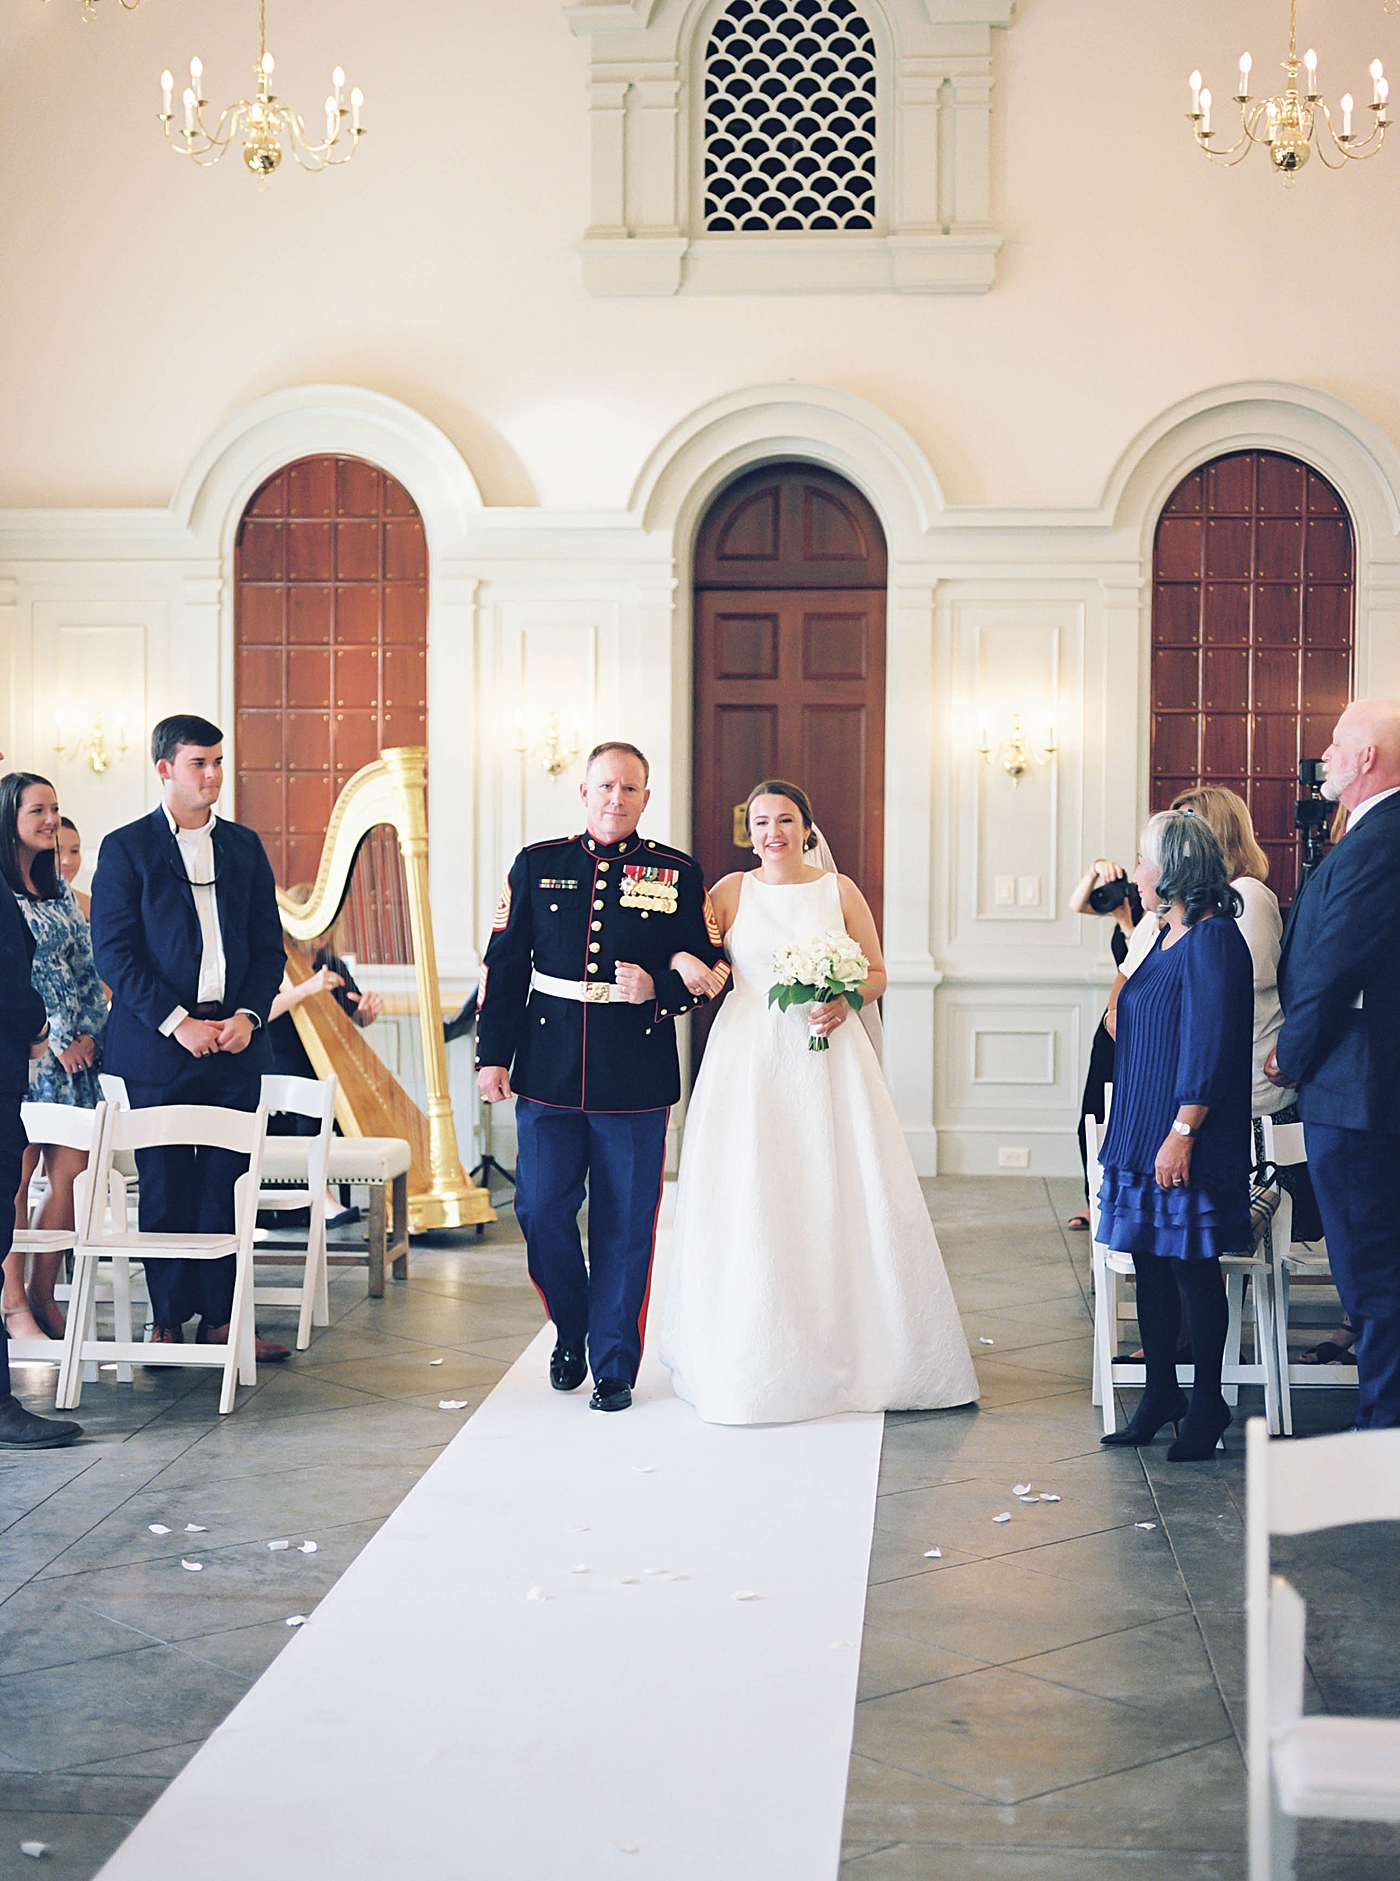 Bride being walked down the aisle during Intimate spring wedding | Carters Event Co